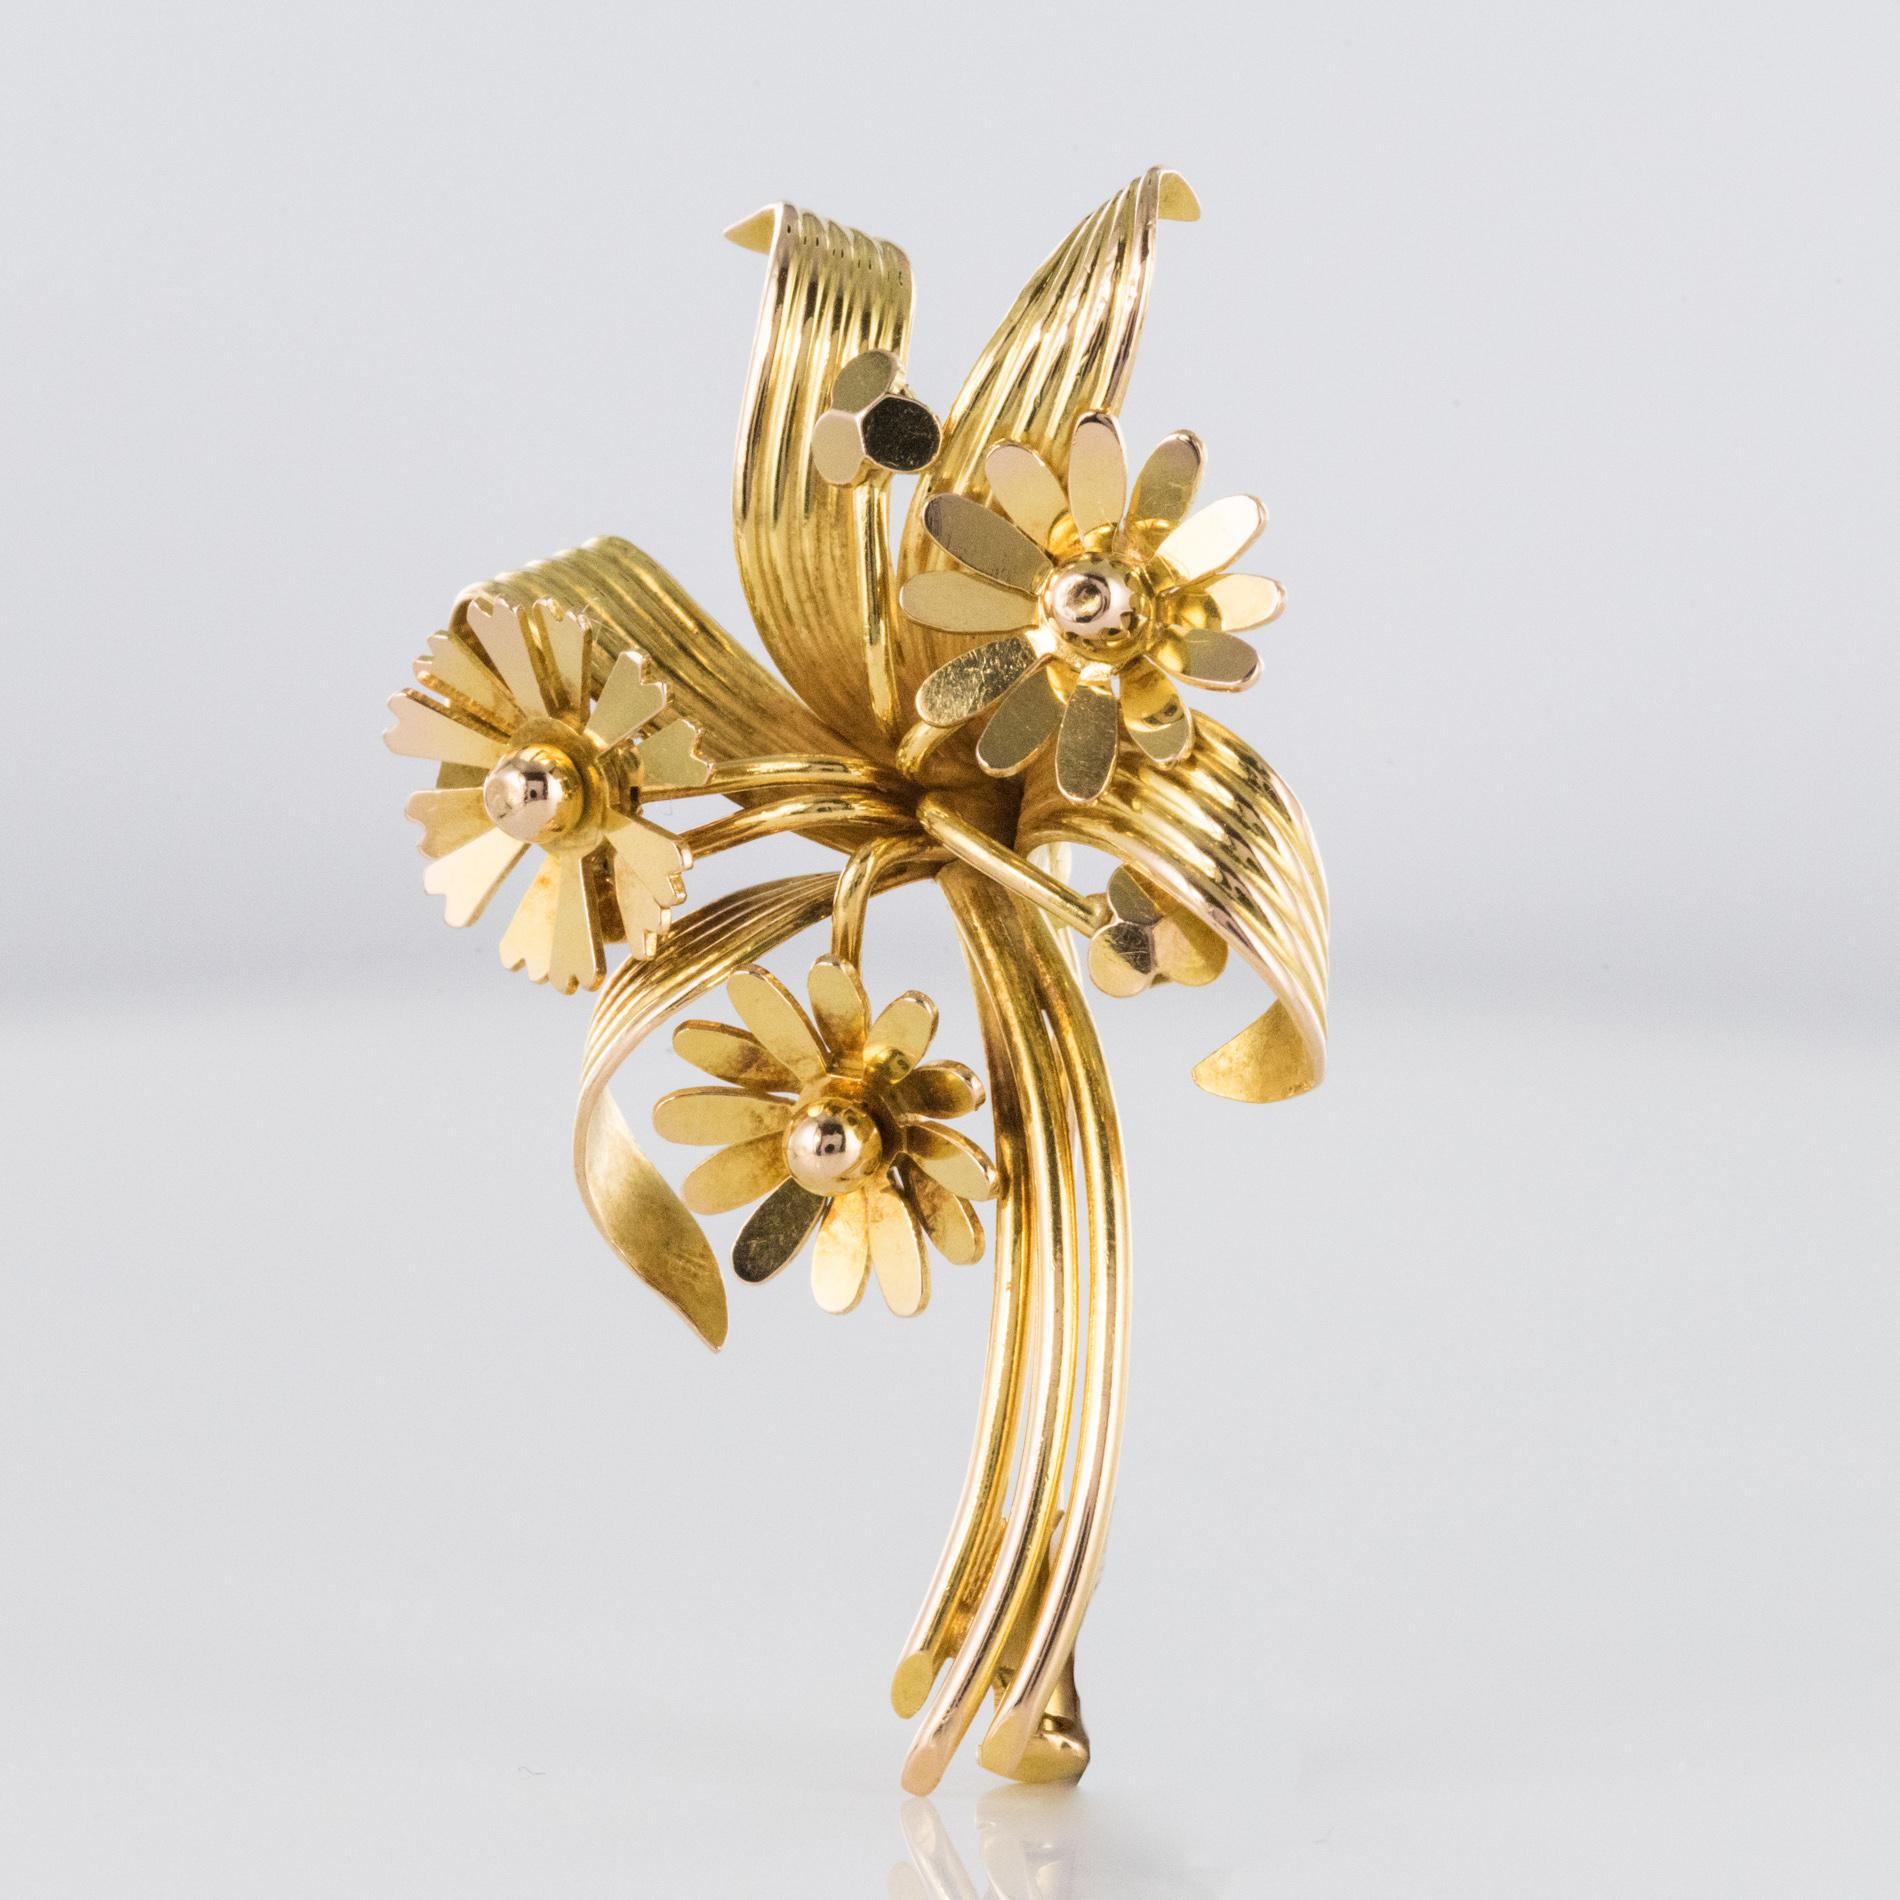 Retro 1950s French 18 Karat Yellow Gold Floral Brooch